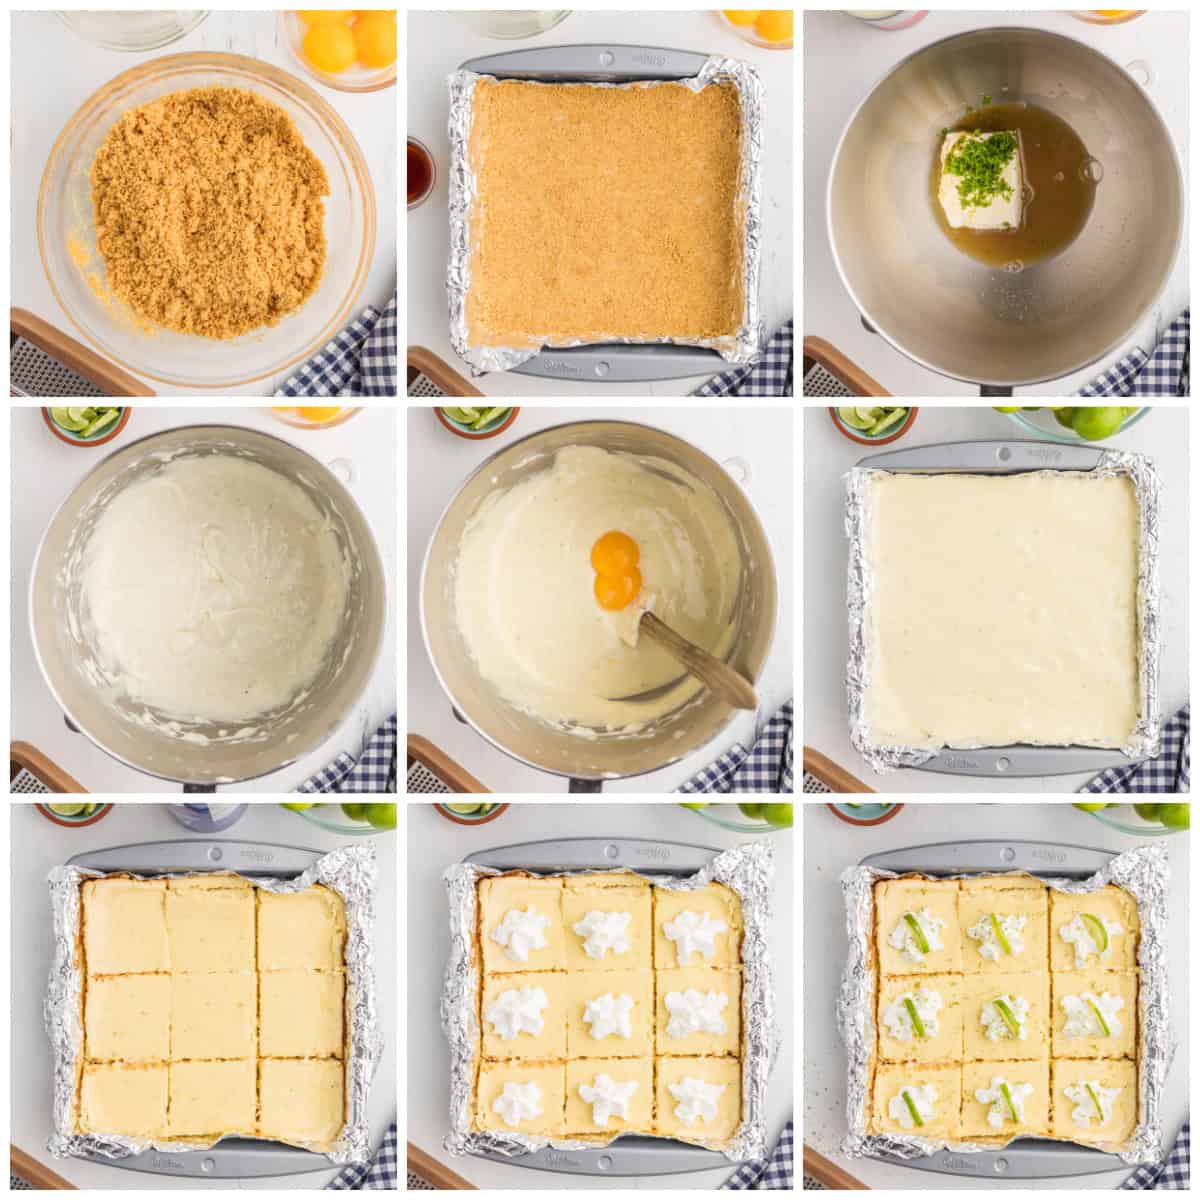 Step by step photos on how to make Key Lime Pie Bars.